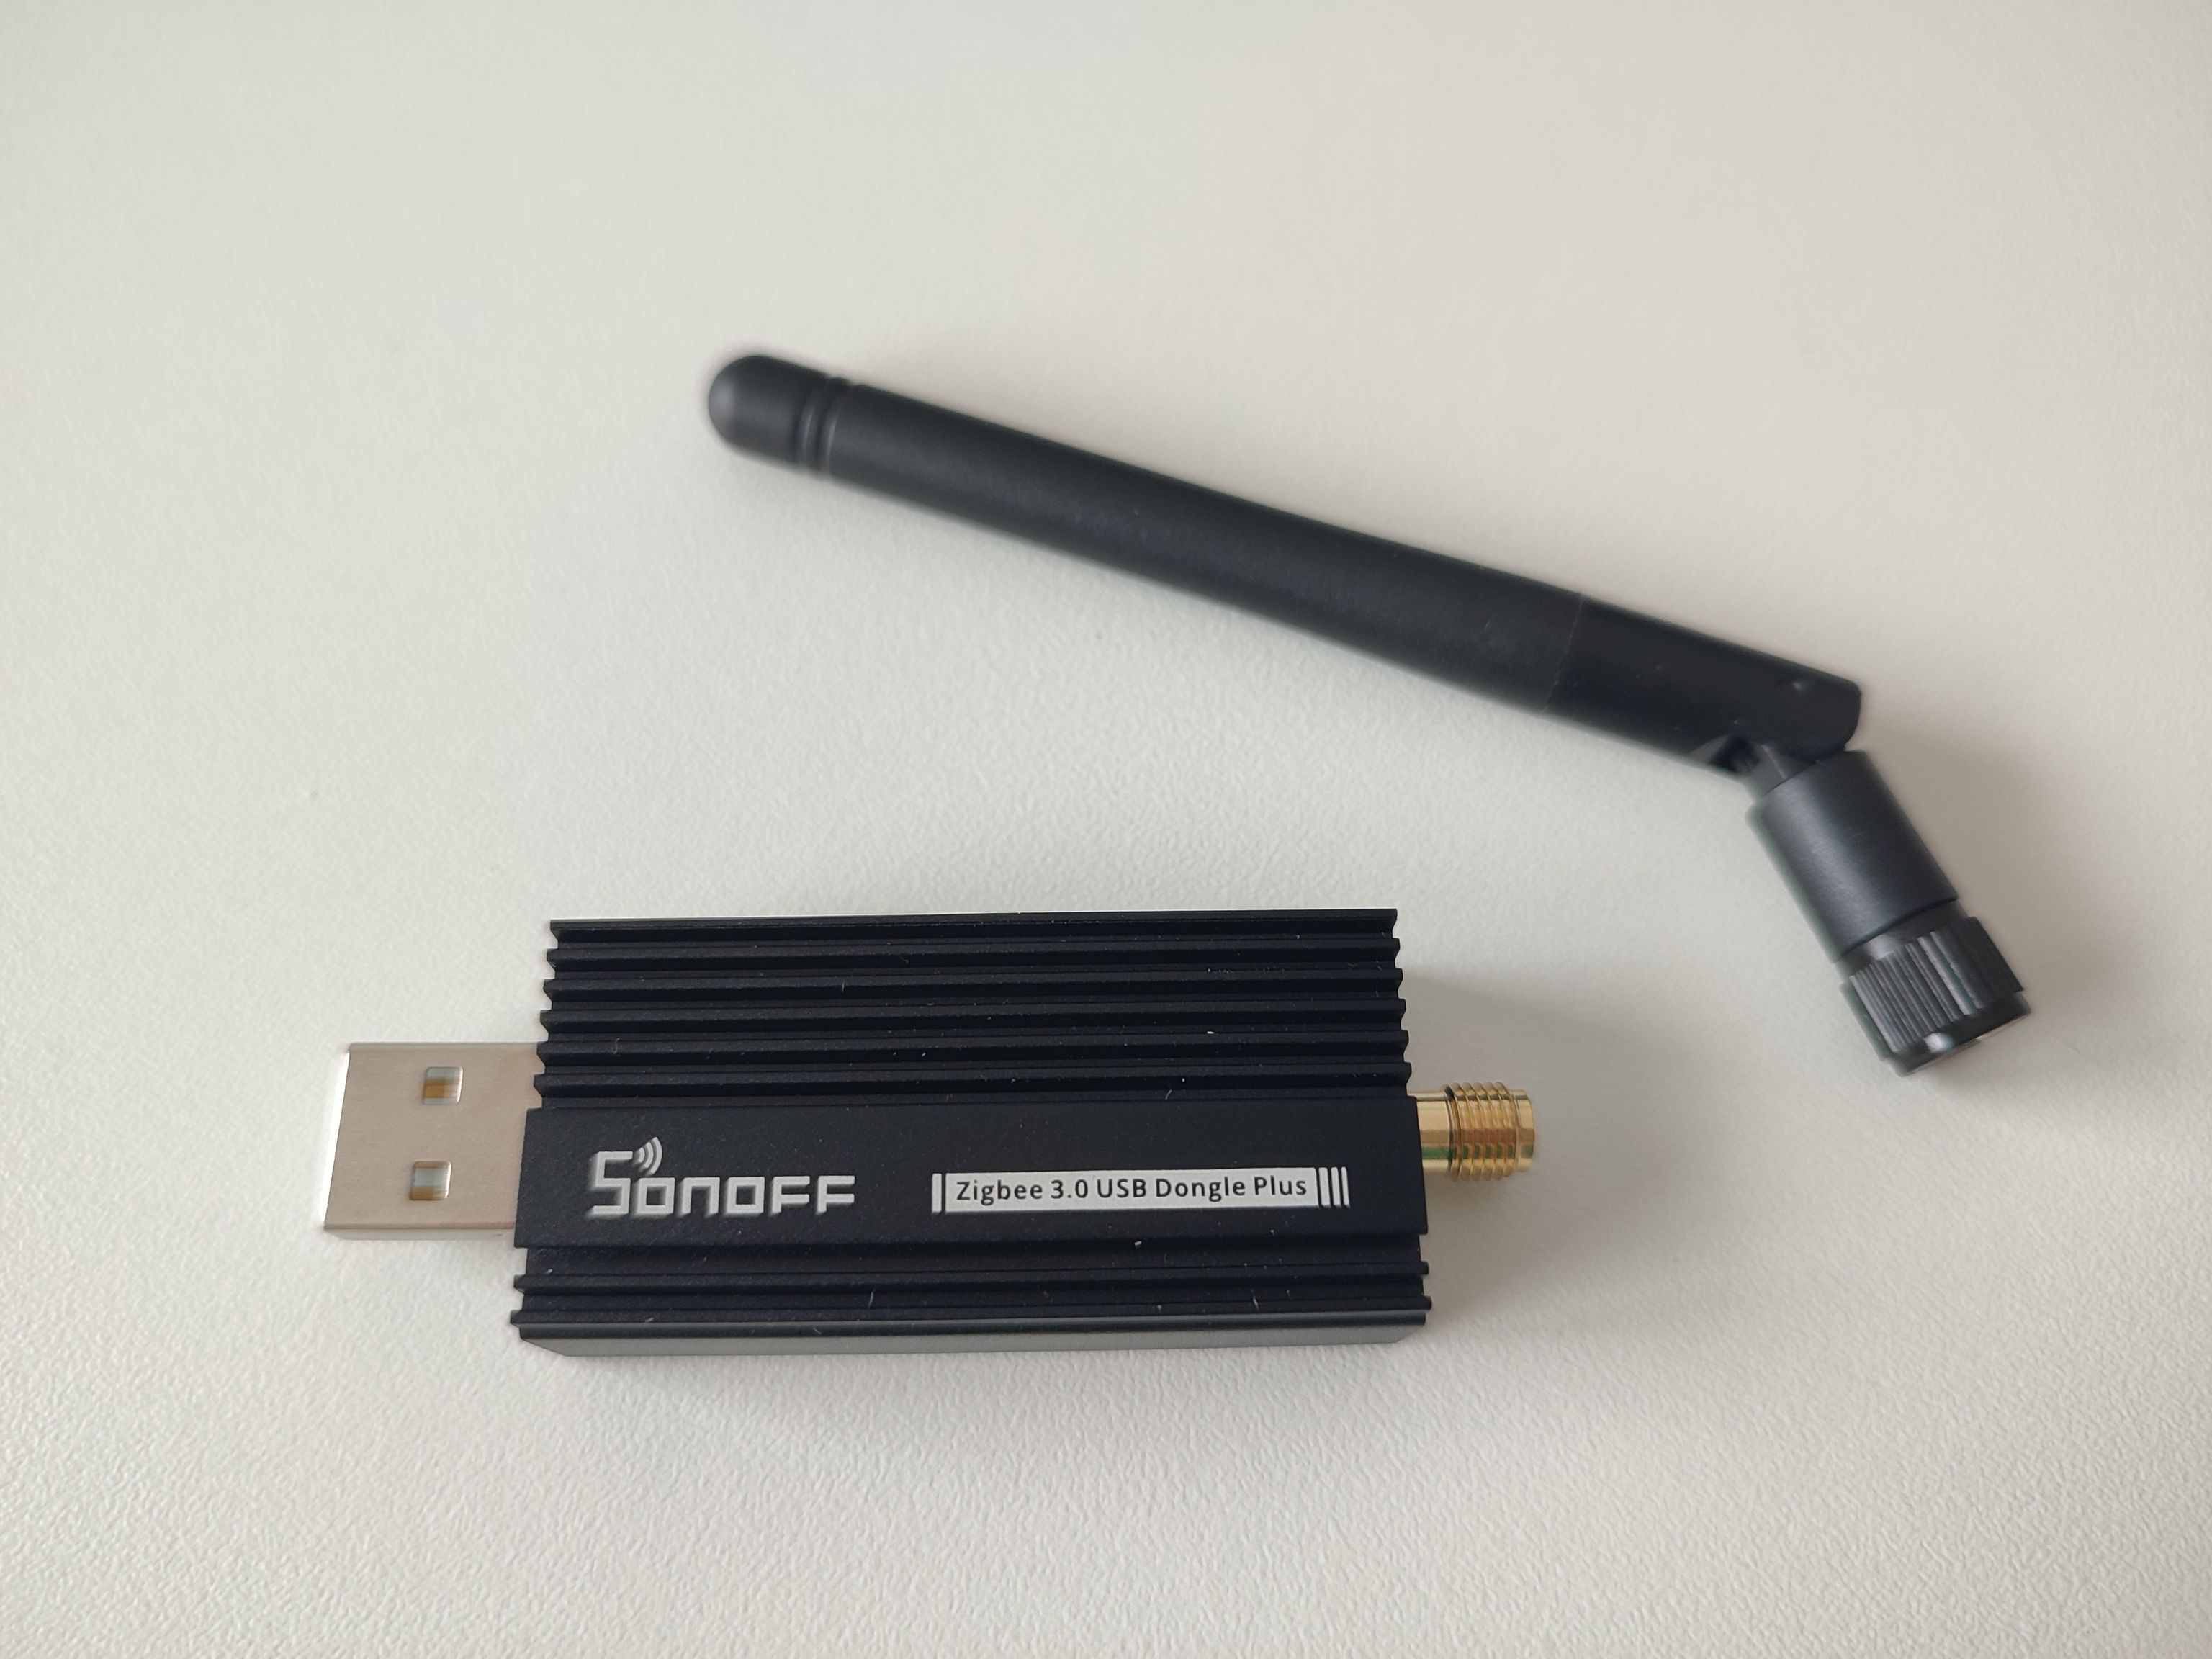 Sonoff ZBDongle-E USB Stick with detached antenna